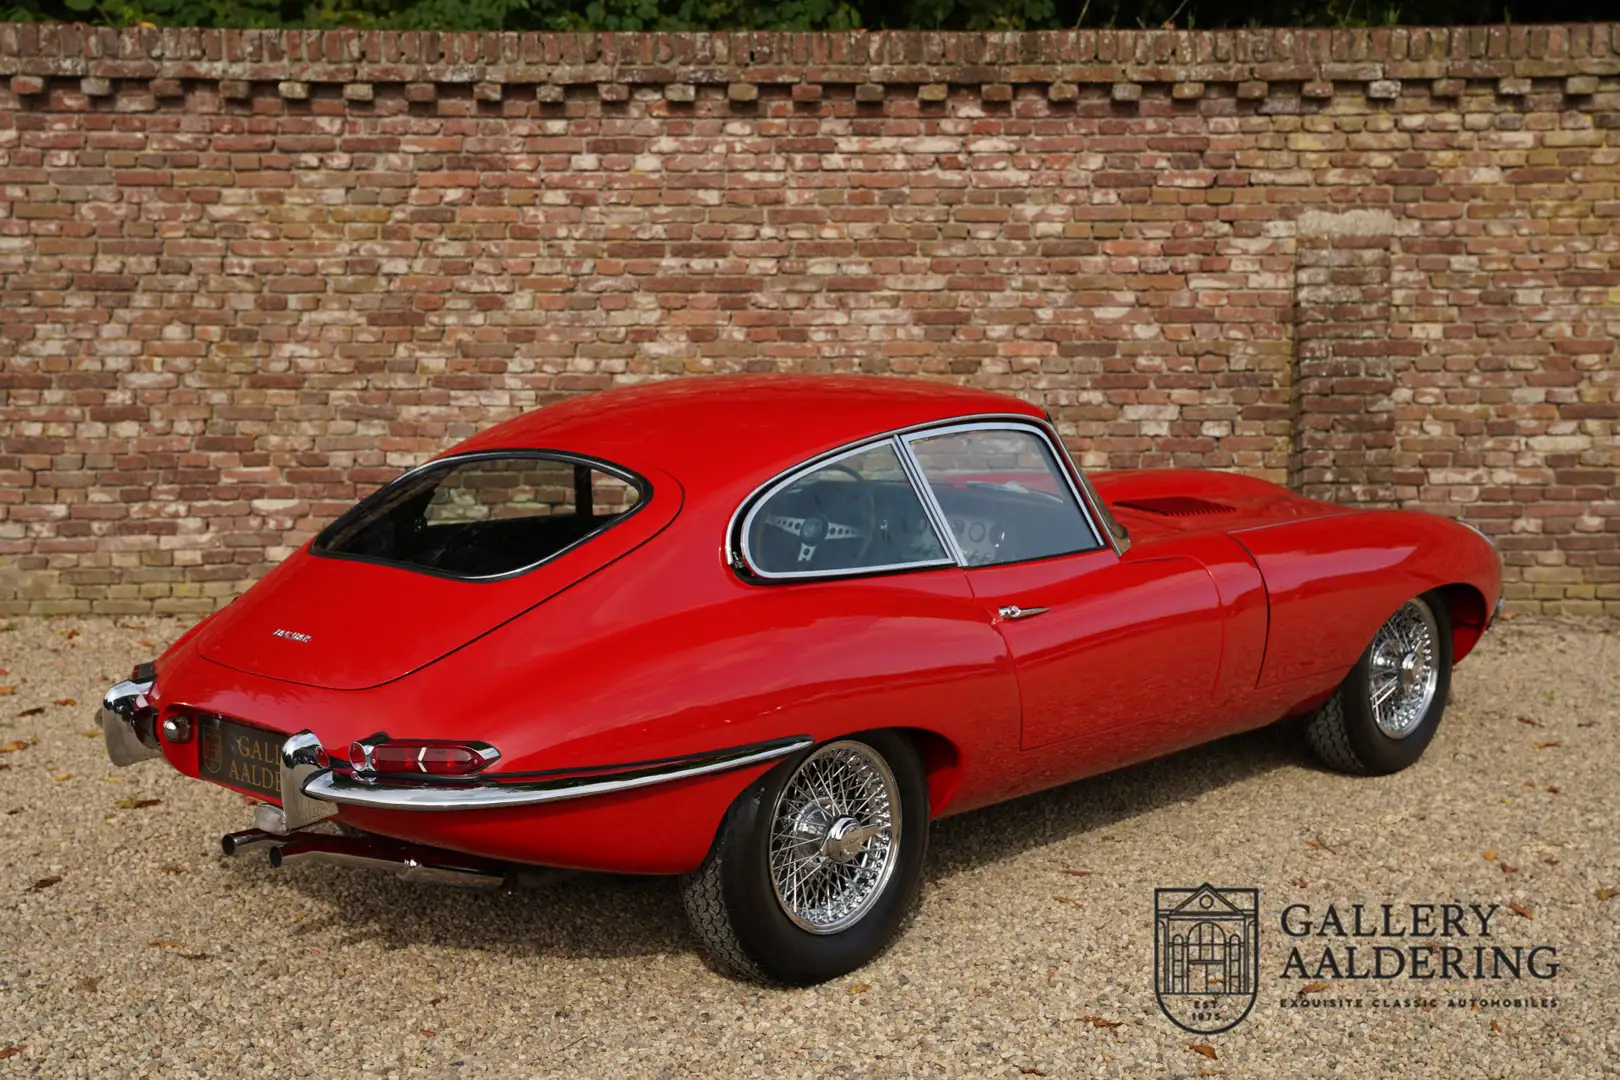 Jaguar E-Type XKE 3.8 series 1 FHC Matching numbers, restored an Red - 2